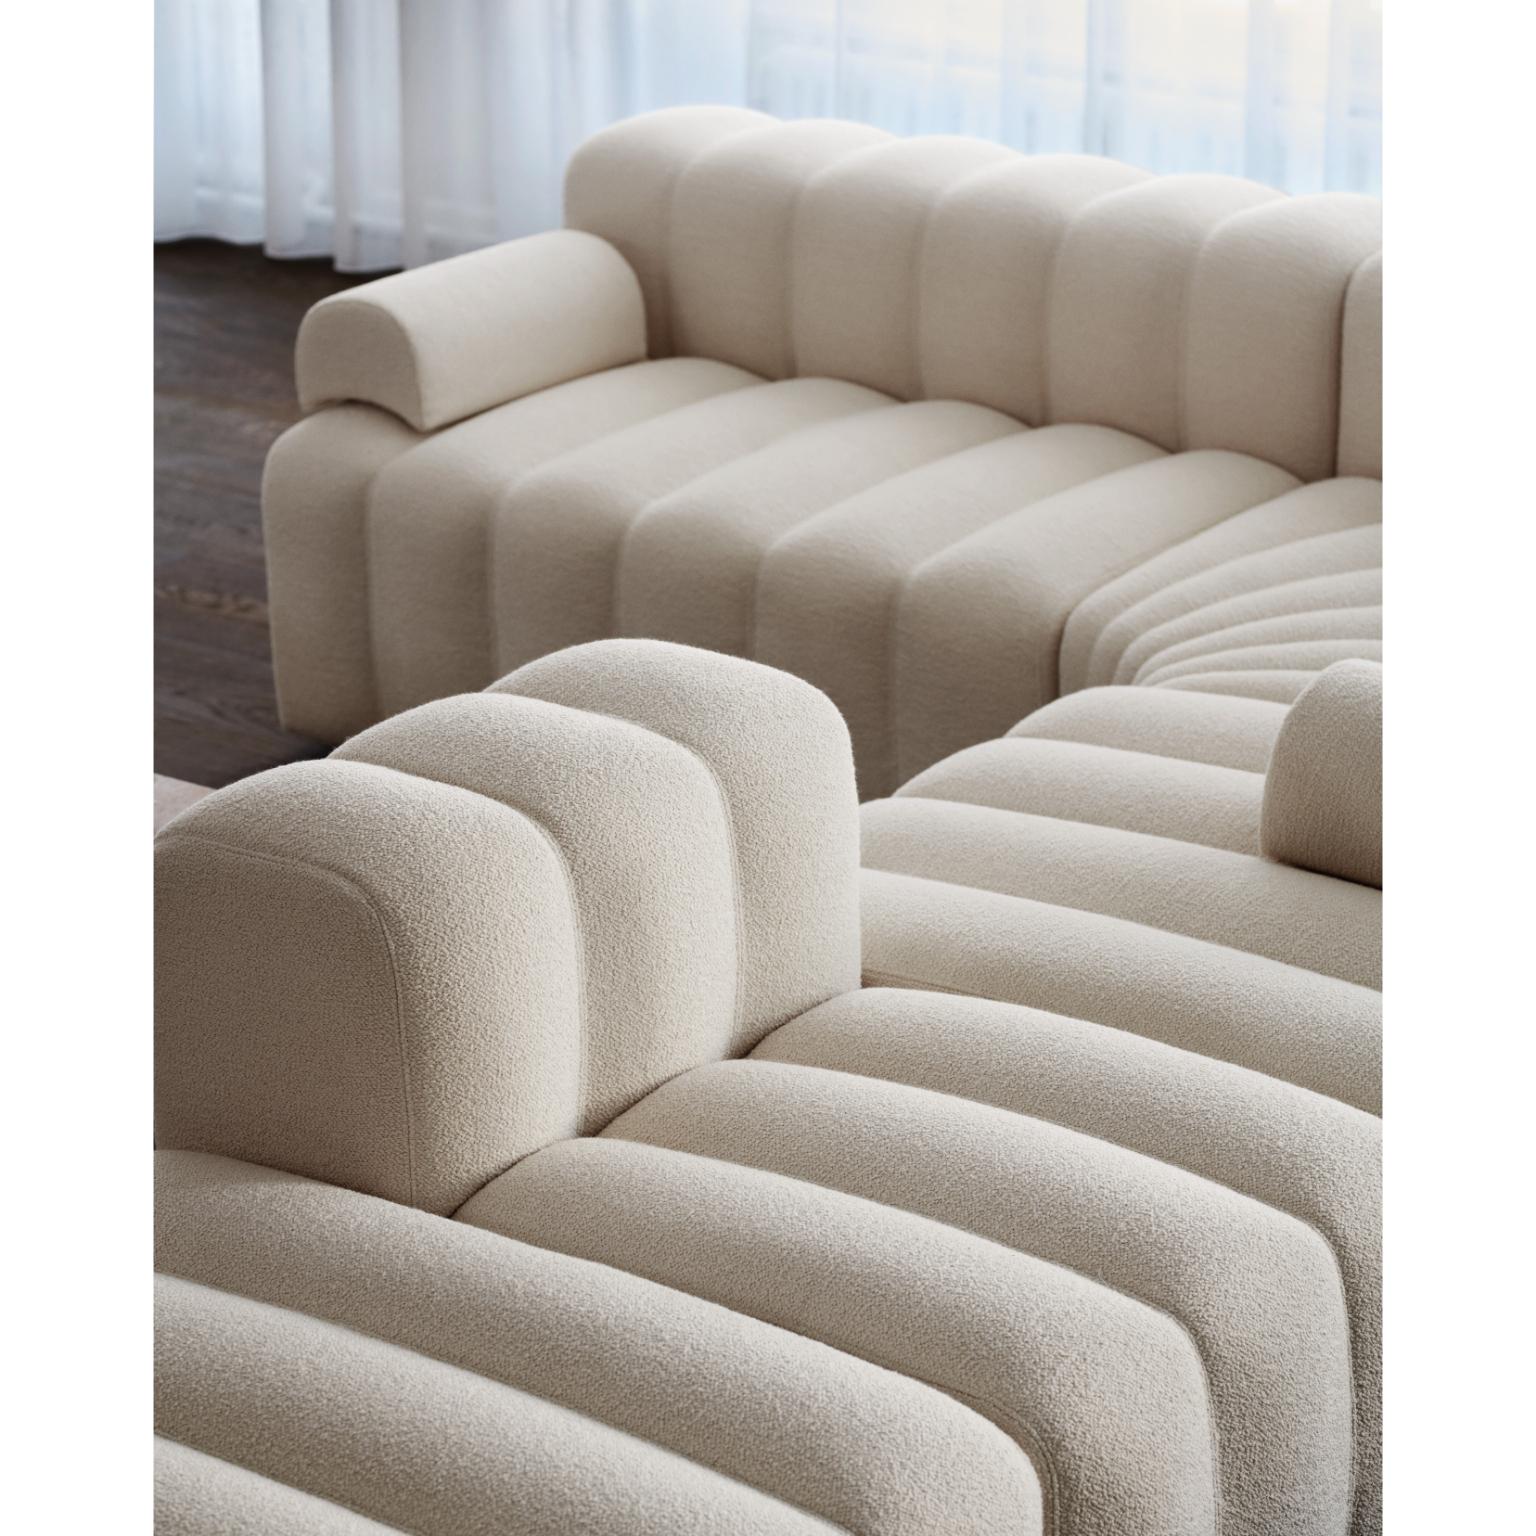 Studio Lounge Medium Left Modular Sofa With Short Armrest by NORR11
Dimensions: D 130 x W 113 x H 70 cm. SH 47 cm. 
Materials: Foam, wood and upholstery.
Upholstery: Barnum Boucle Color 3.

Available in different upholstery options. A plywood